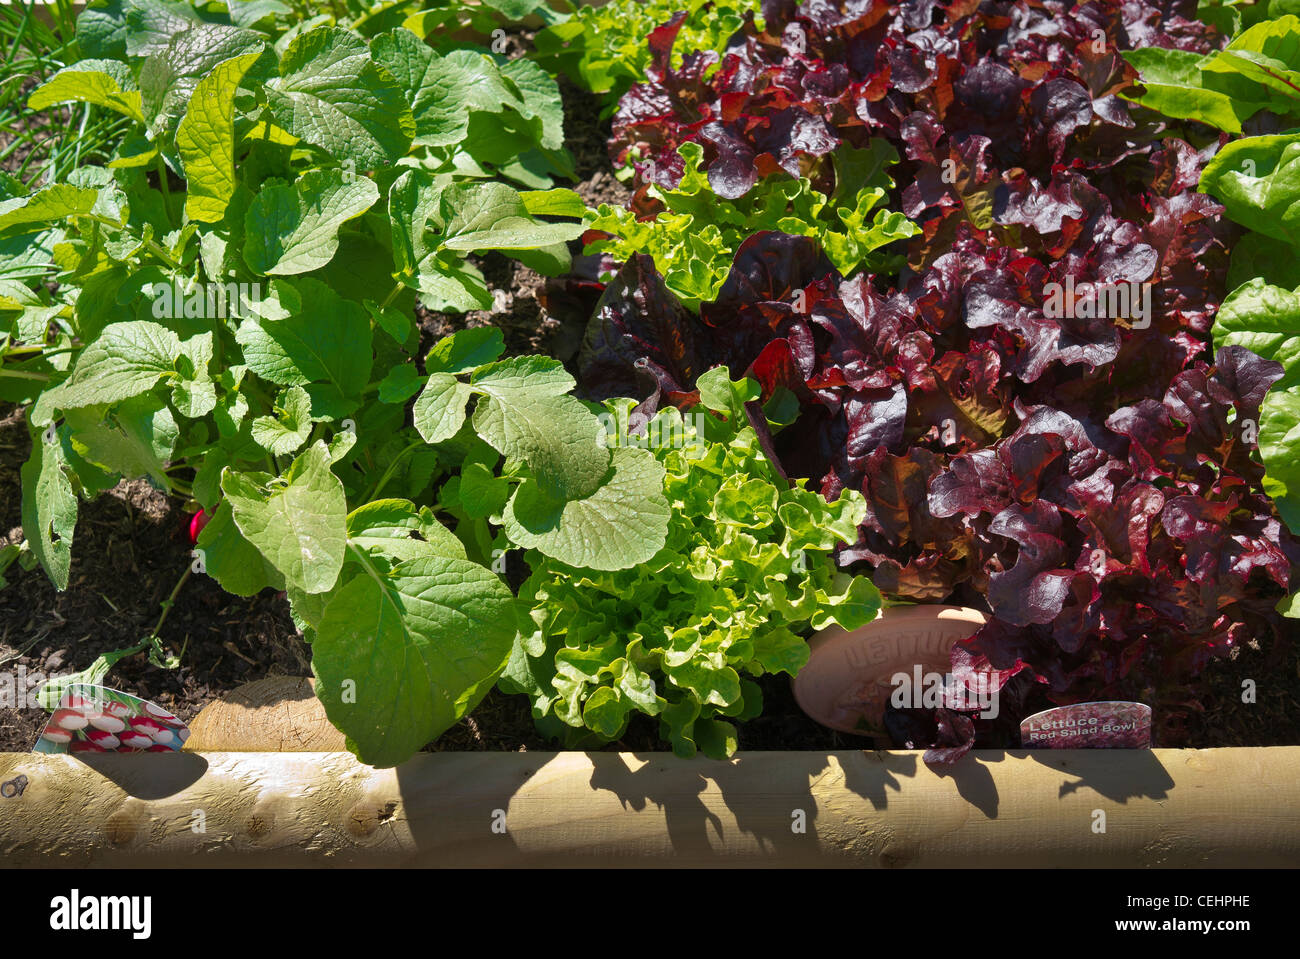 Salad crops growing in a planter Stock Photo